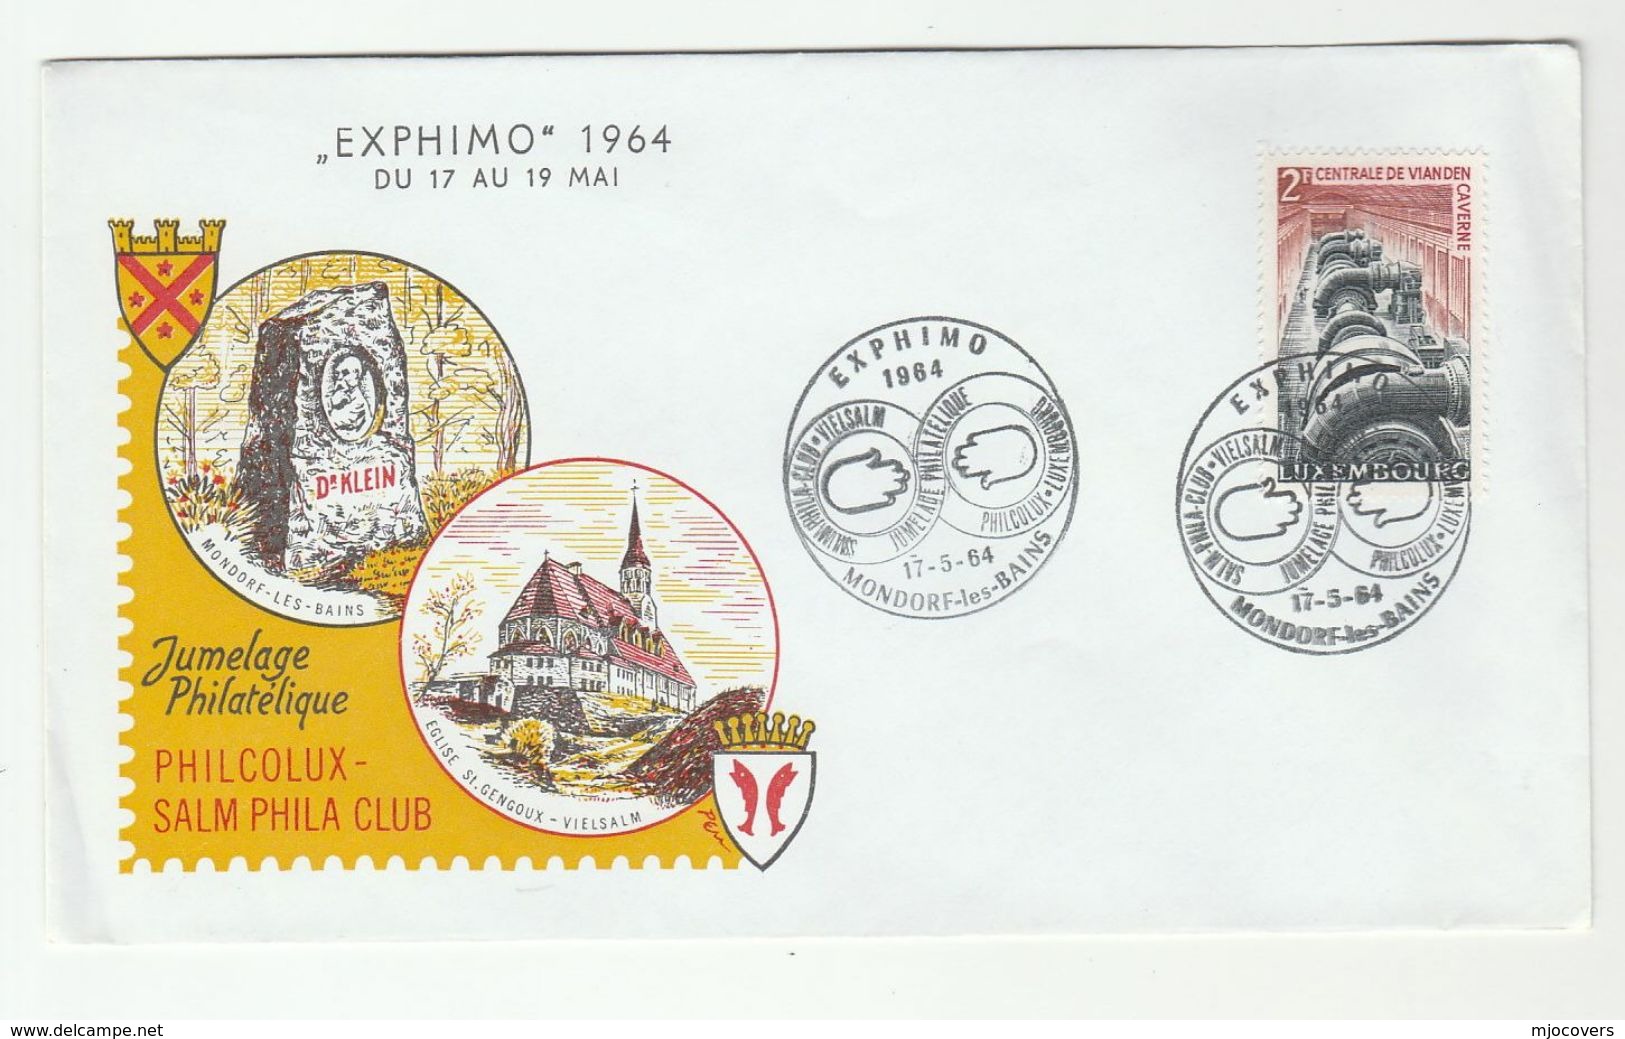 1964 LUXEMBOURG EXPHIMO EVENT COVER Mondorf Les Bains DR KLEIN ST GENGOUX CHURCH  HYDRO ELECTRICITY  Energy Religion - Covers & Documents